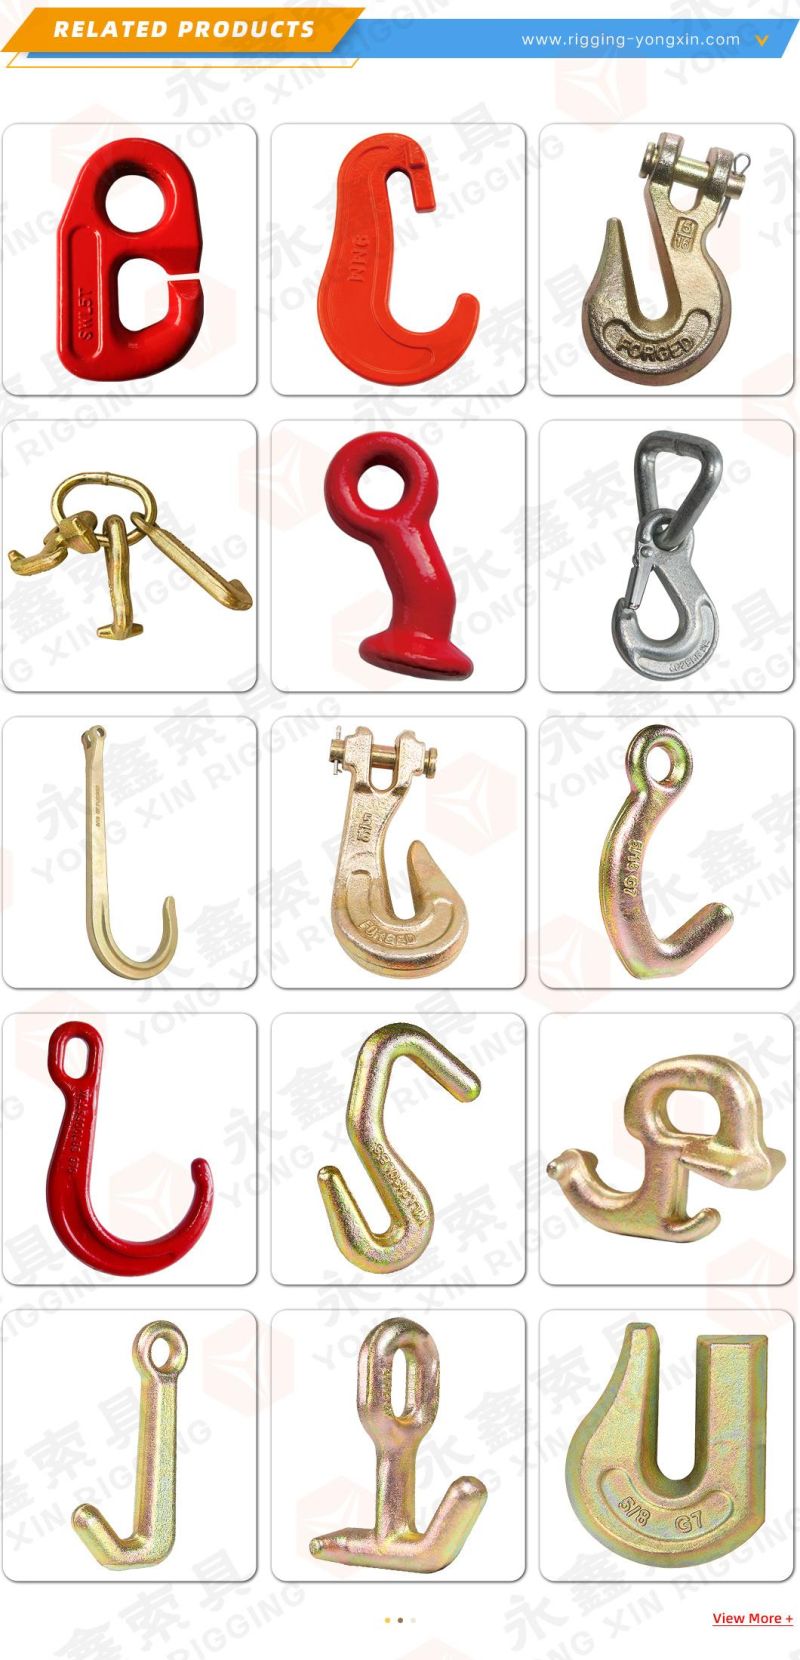 Us Type Alloy Steel Forged H331/A331clevis Slip Hook with Latch